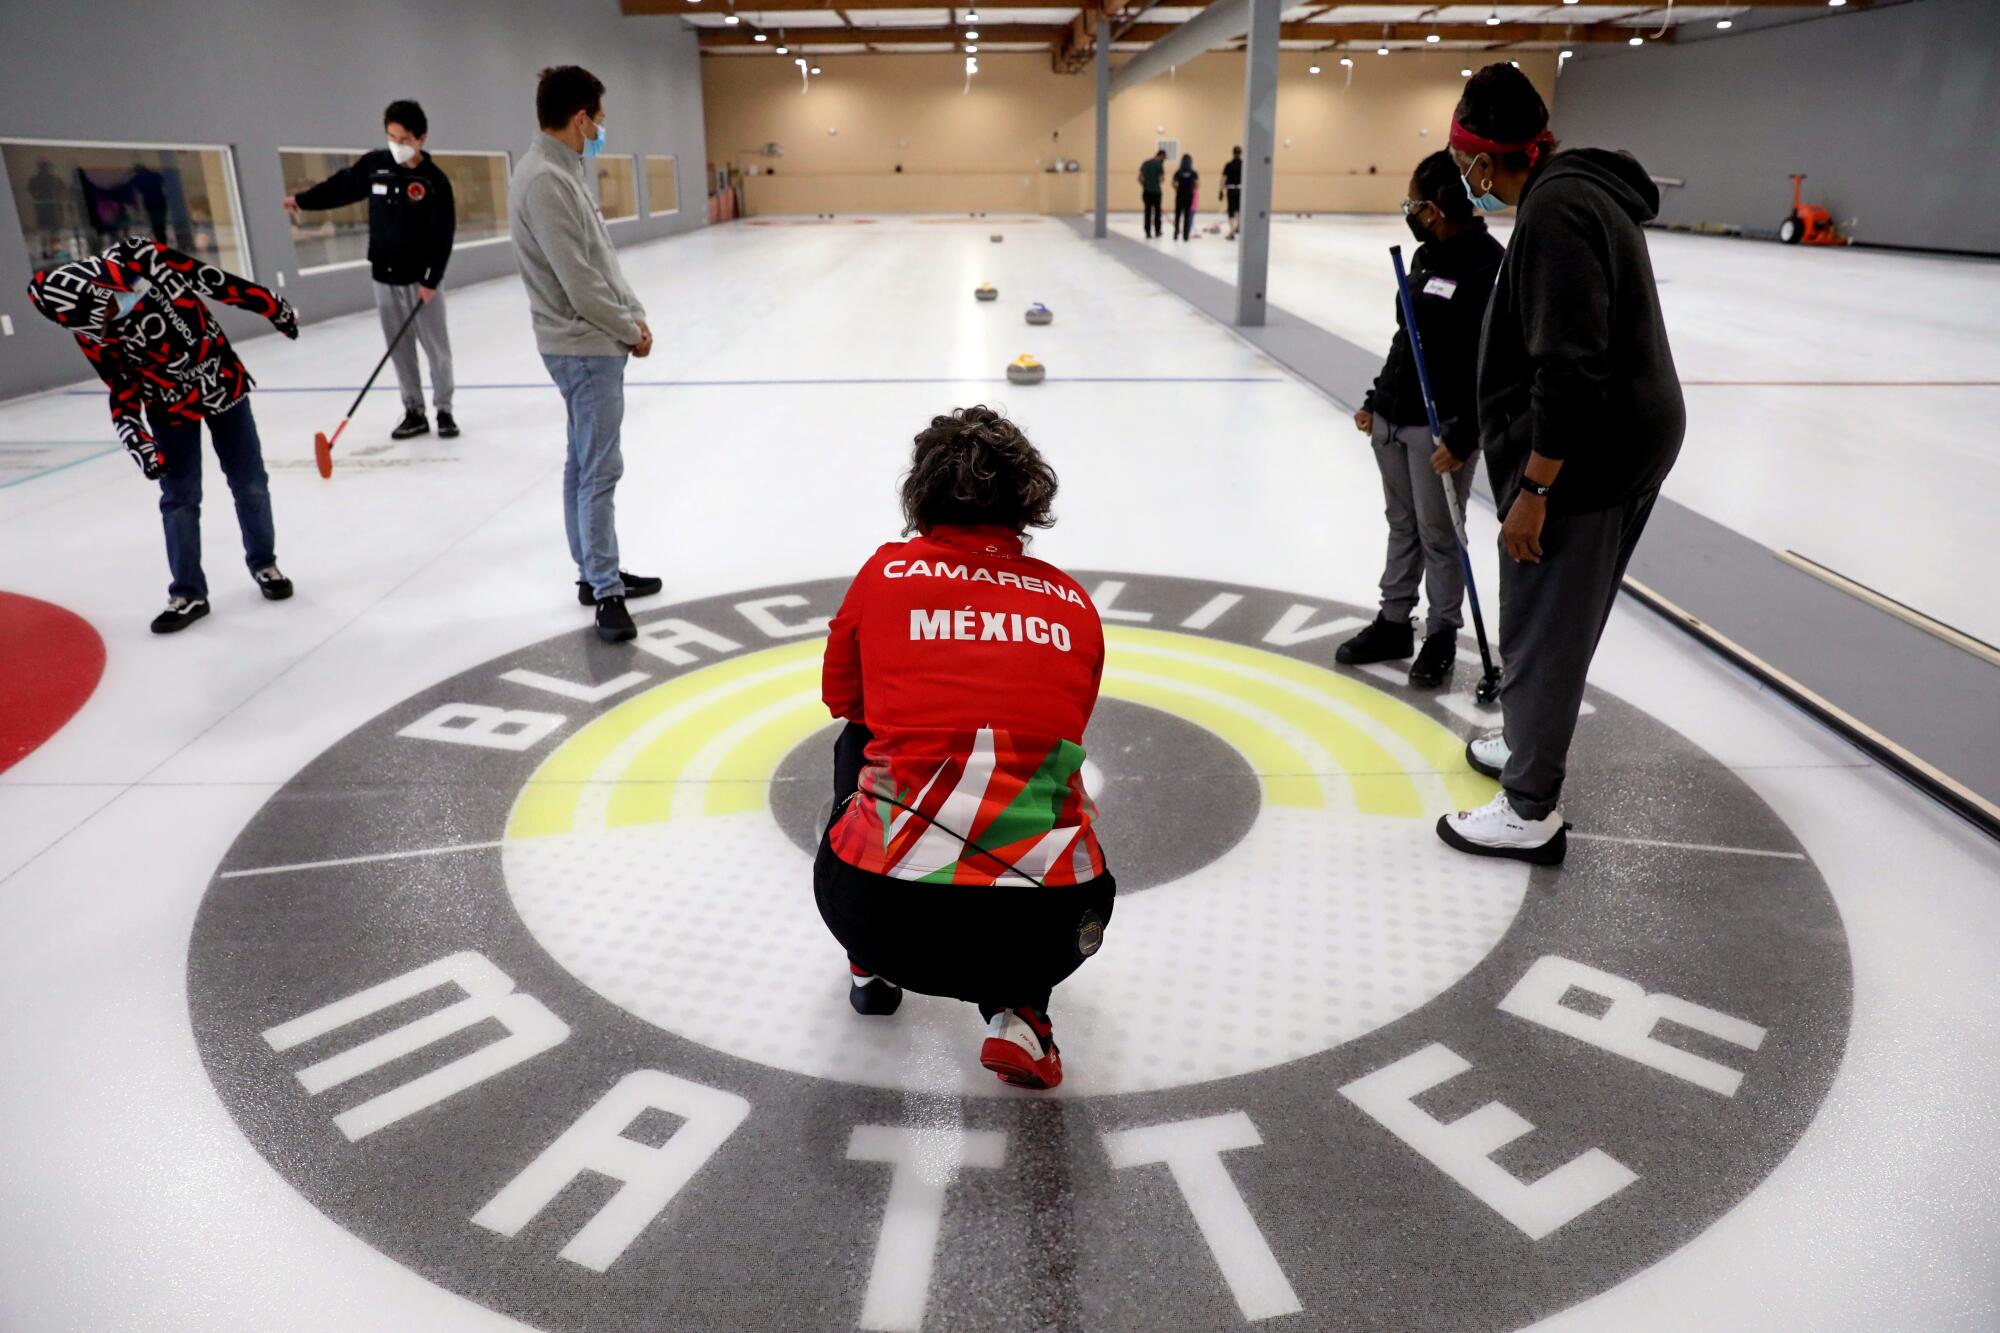 Instructor Adriana Camarena, 51, center, of San Francisco, who is a member of the Mexican curling team.